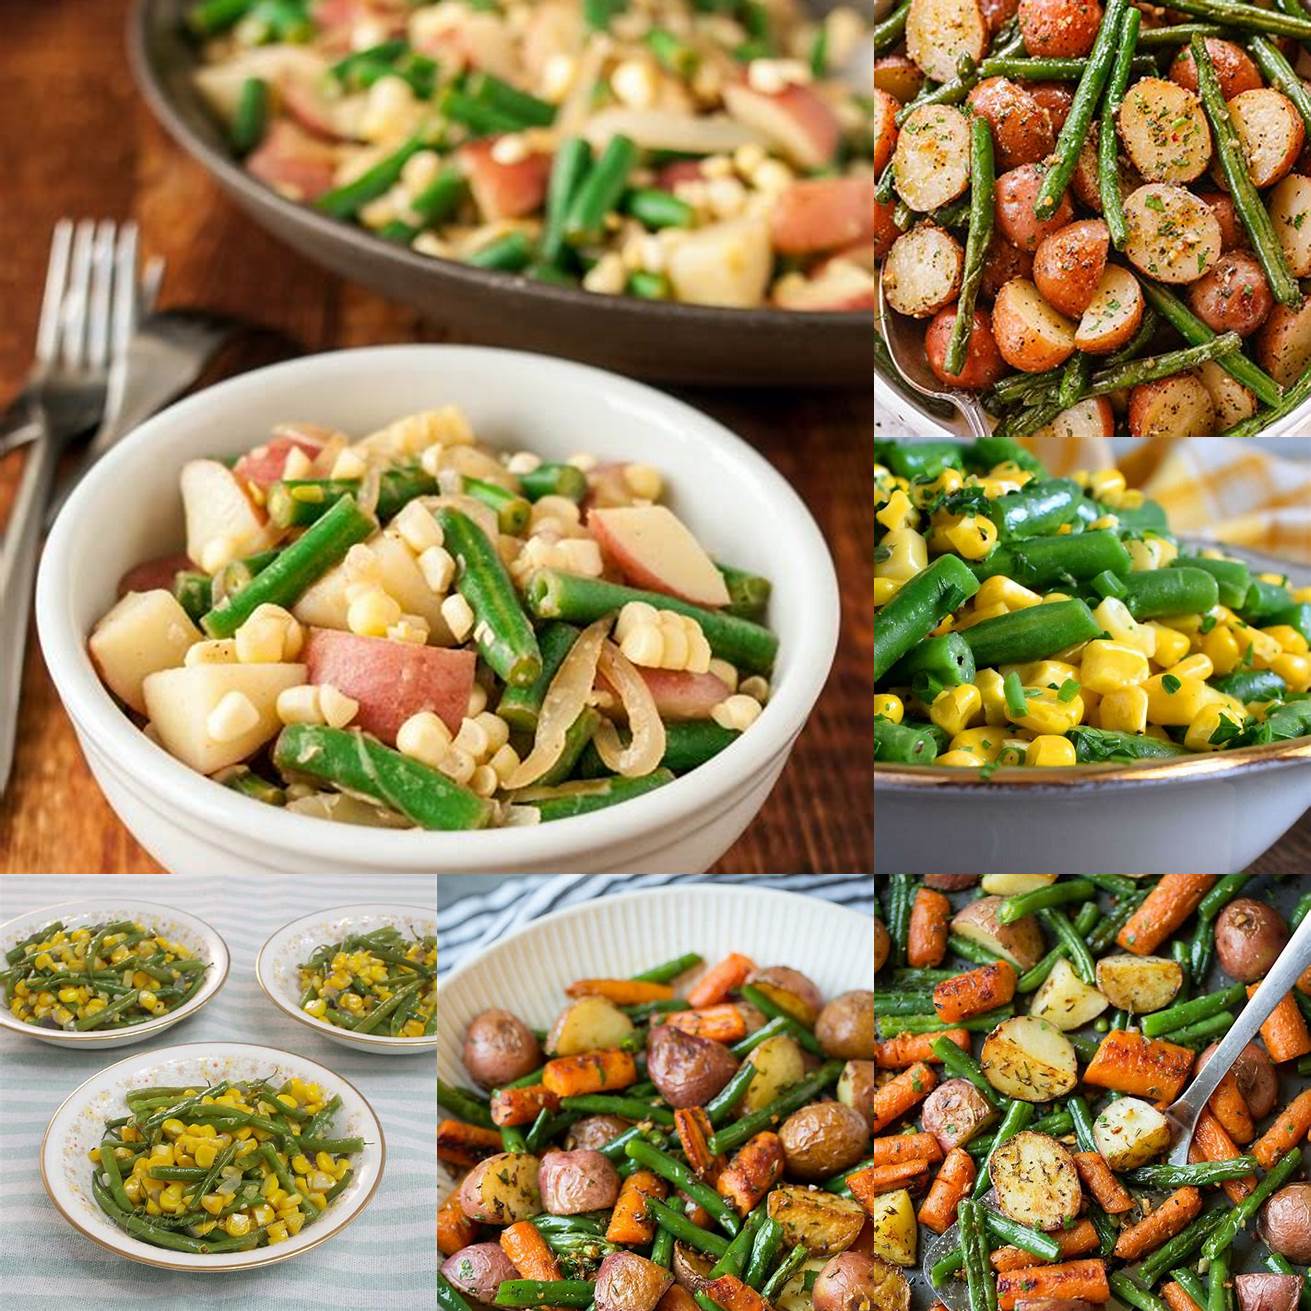 Vegetables Vegetables such as potatoes corn and green beans are commonly used in American cooking Salads are also a popular side dish